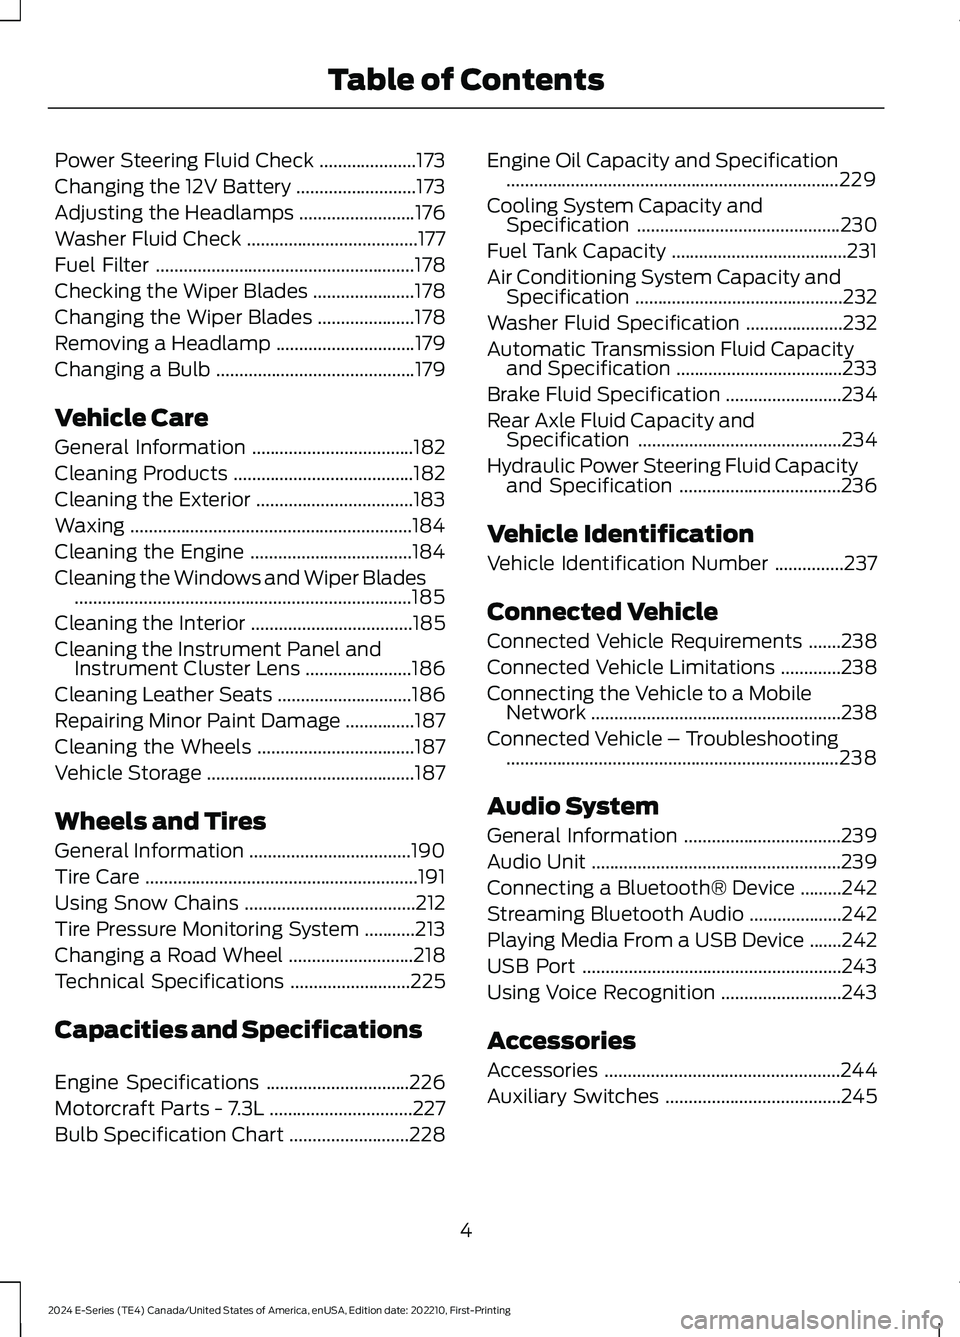 FORD E SERIES 2024  Owners Manual Power Steering Fluid Check.....................173
Changing the 12V Battery..........................173
Adjusting the Headlamps.........................176
Washer Fluid Check.........................